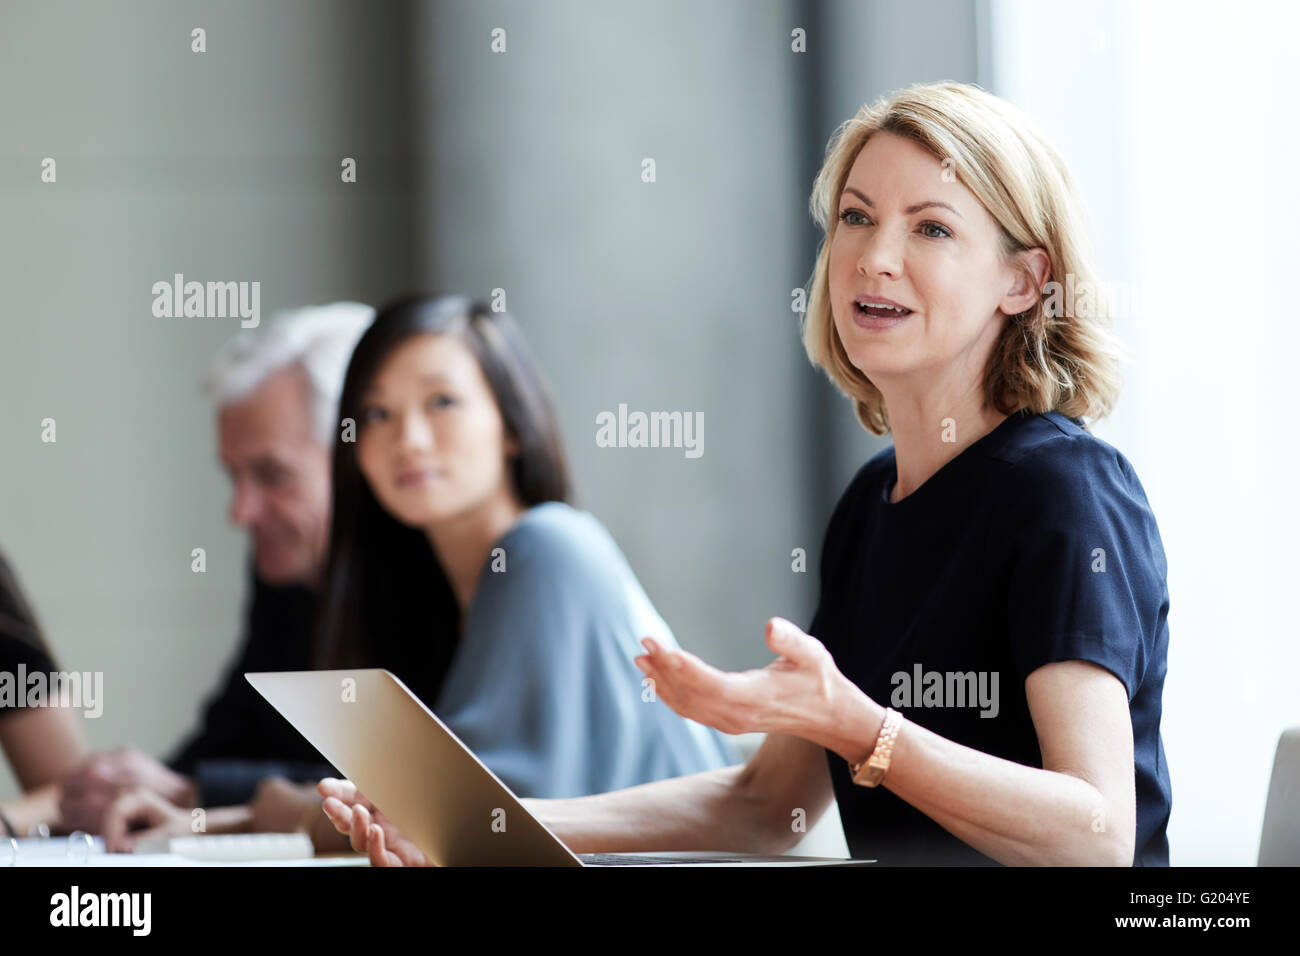 Businesswoman gesturing and talking in meeting Stock Photo